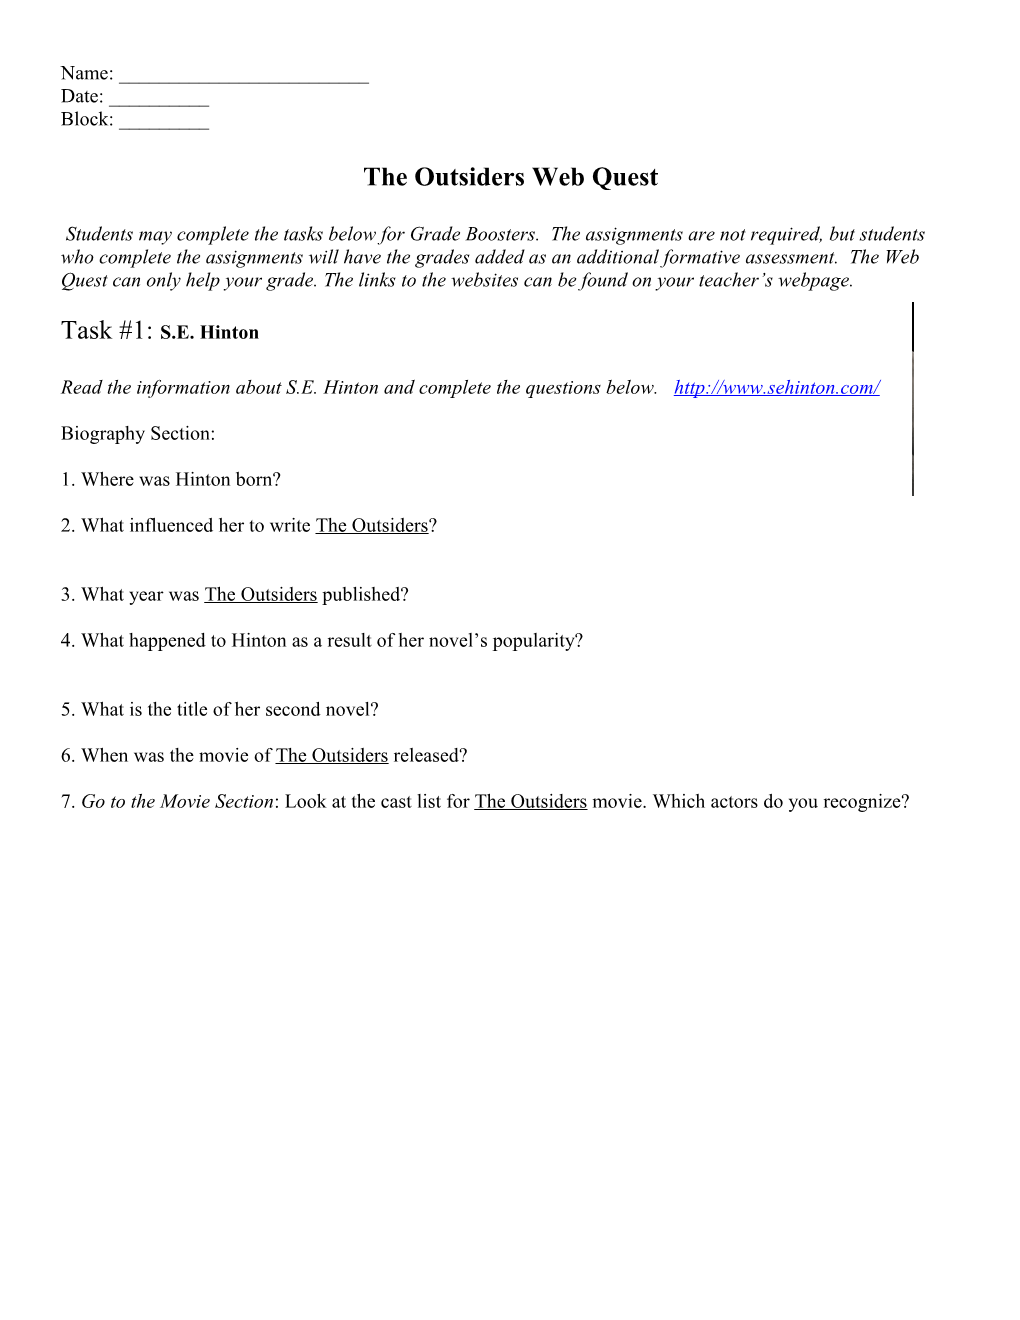 The Outsiders Web Quest